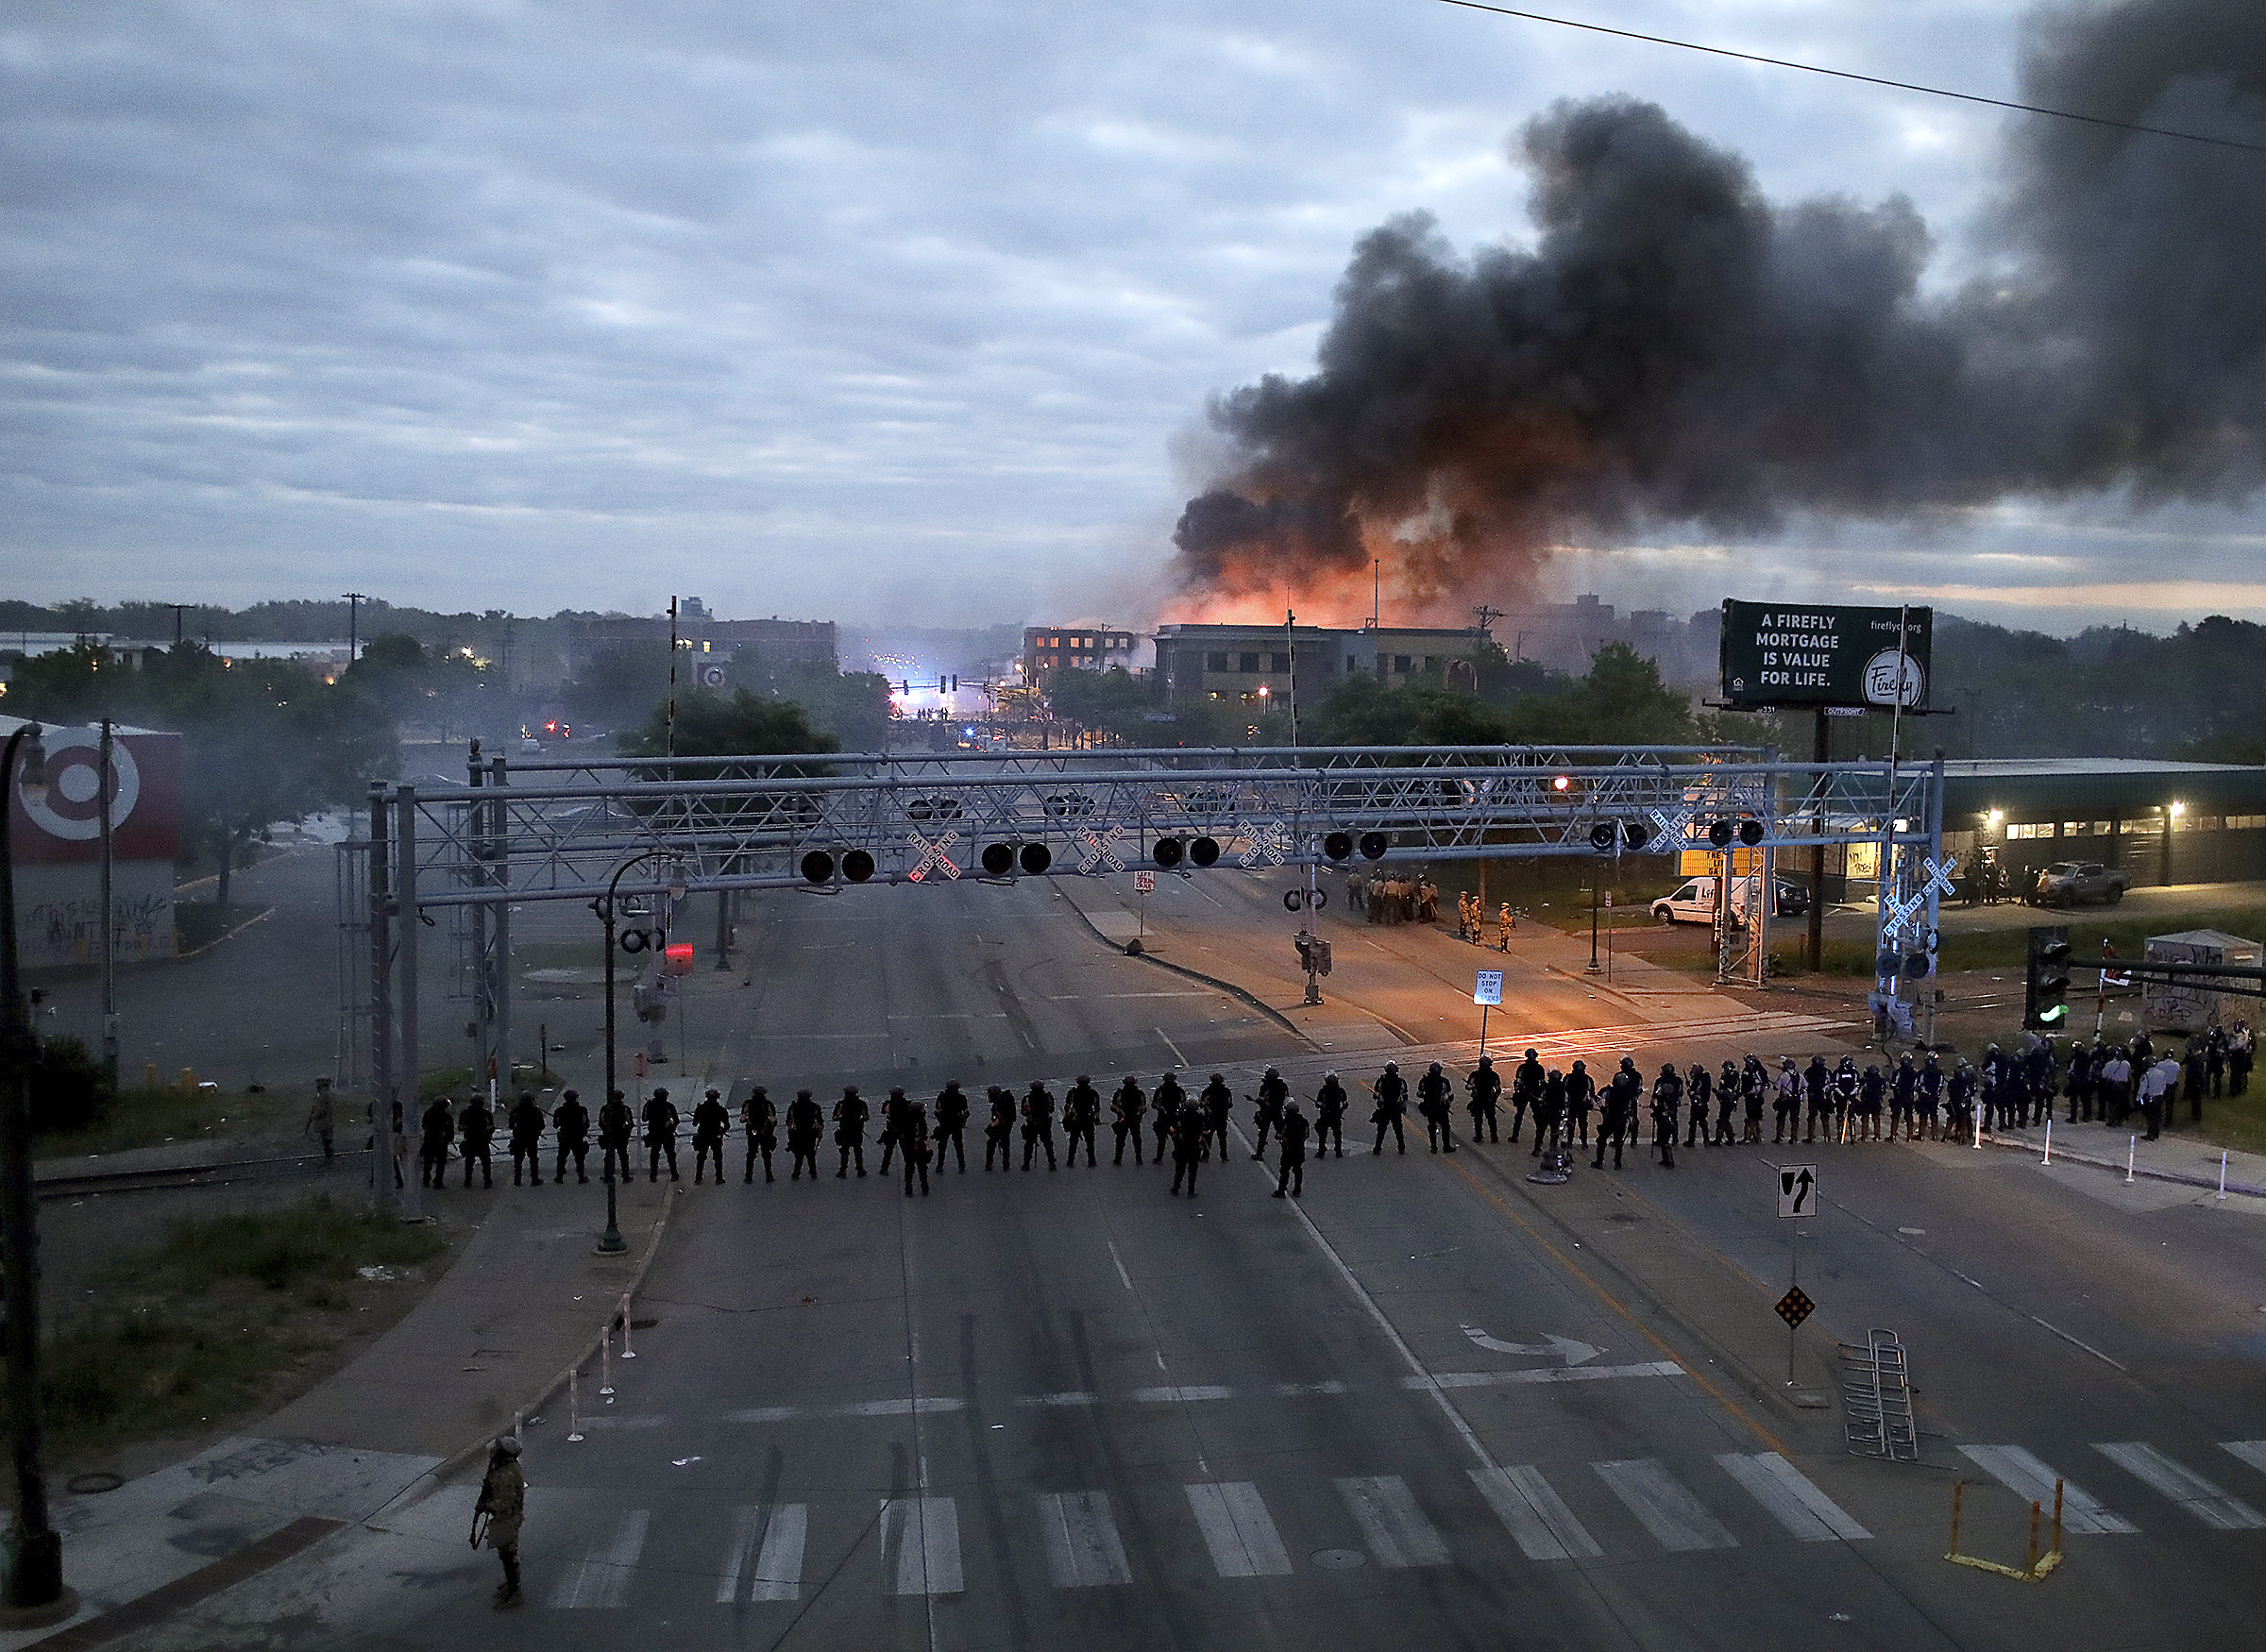 Law enforcement officers amassed along Lake Street near Hiawatha Ave. as fires burned after a night of unrest and protests in the death of George Floyd in Minneapolis, Minn. on May 29. (David Joles—Star Tribune/AP)